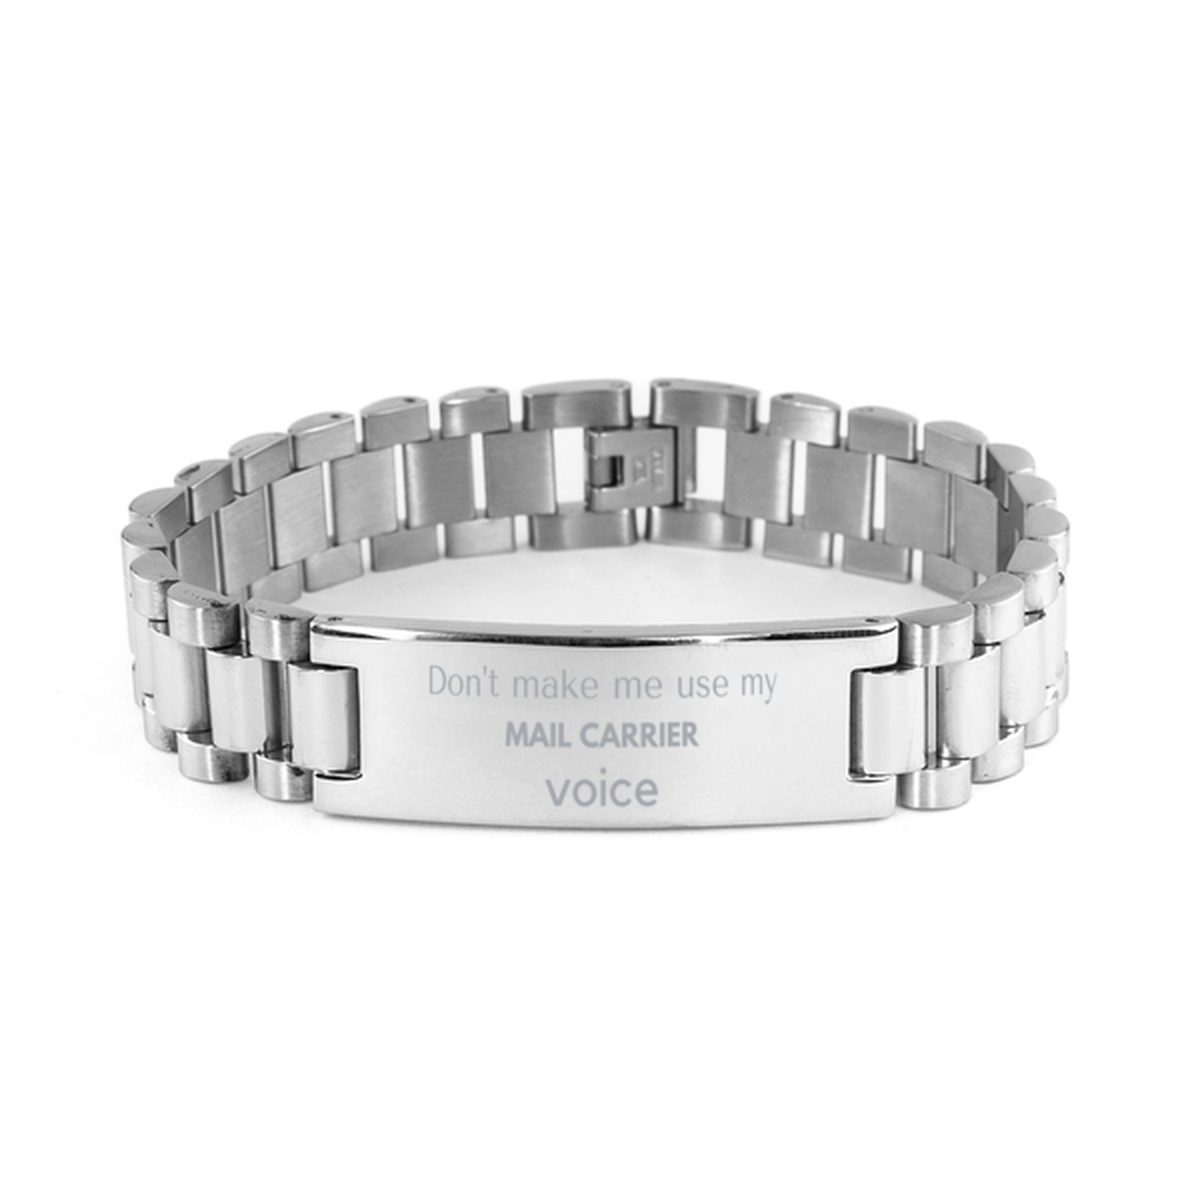 Don't make me use my Mail Carrier voice, Sarcasm Mail Carrier Gifts, Christmas Mail Carrier Ladder Stainless Steel Bracelet Birthday Unique Gifts For Mail Carrier Coworkers, Men, Women, Colleague, Friends